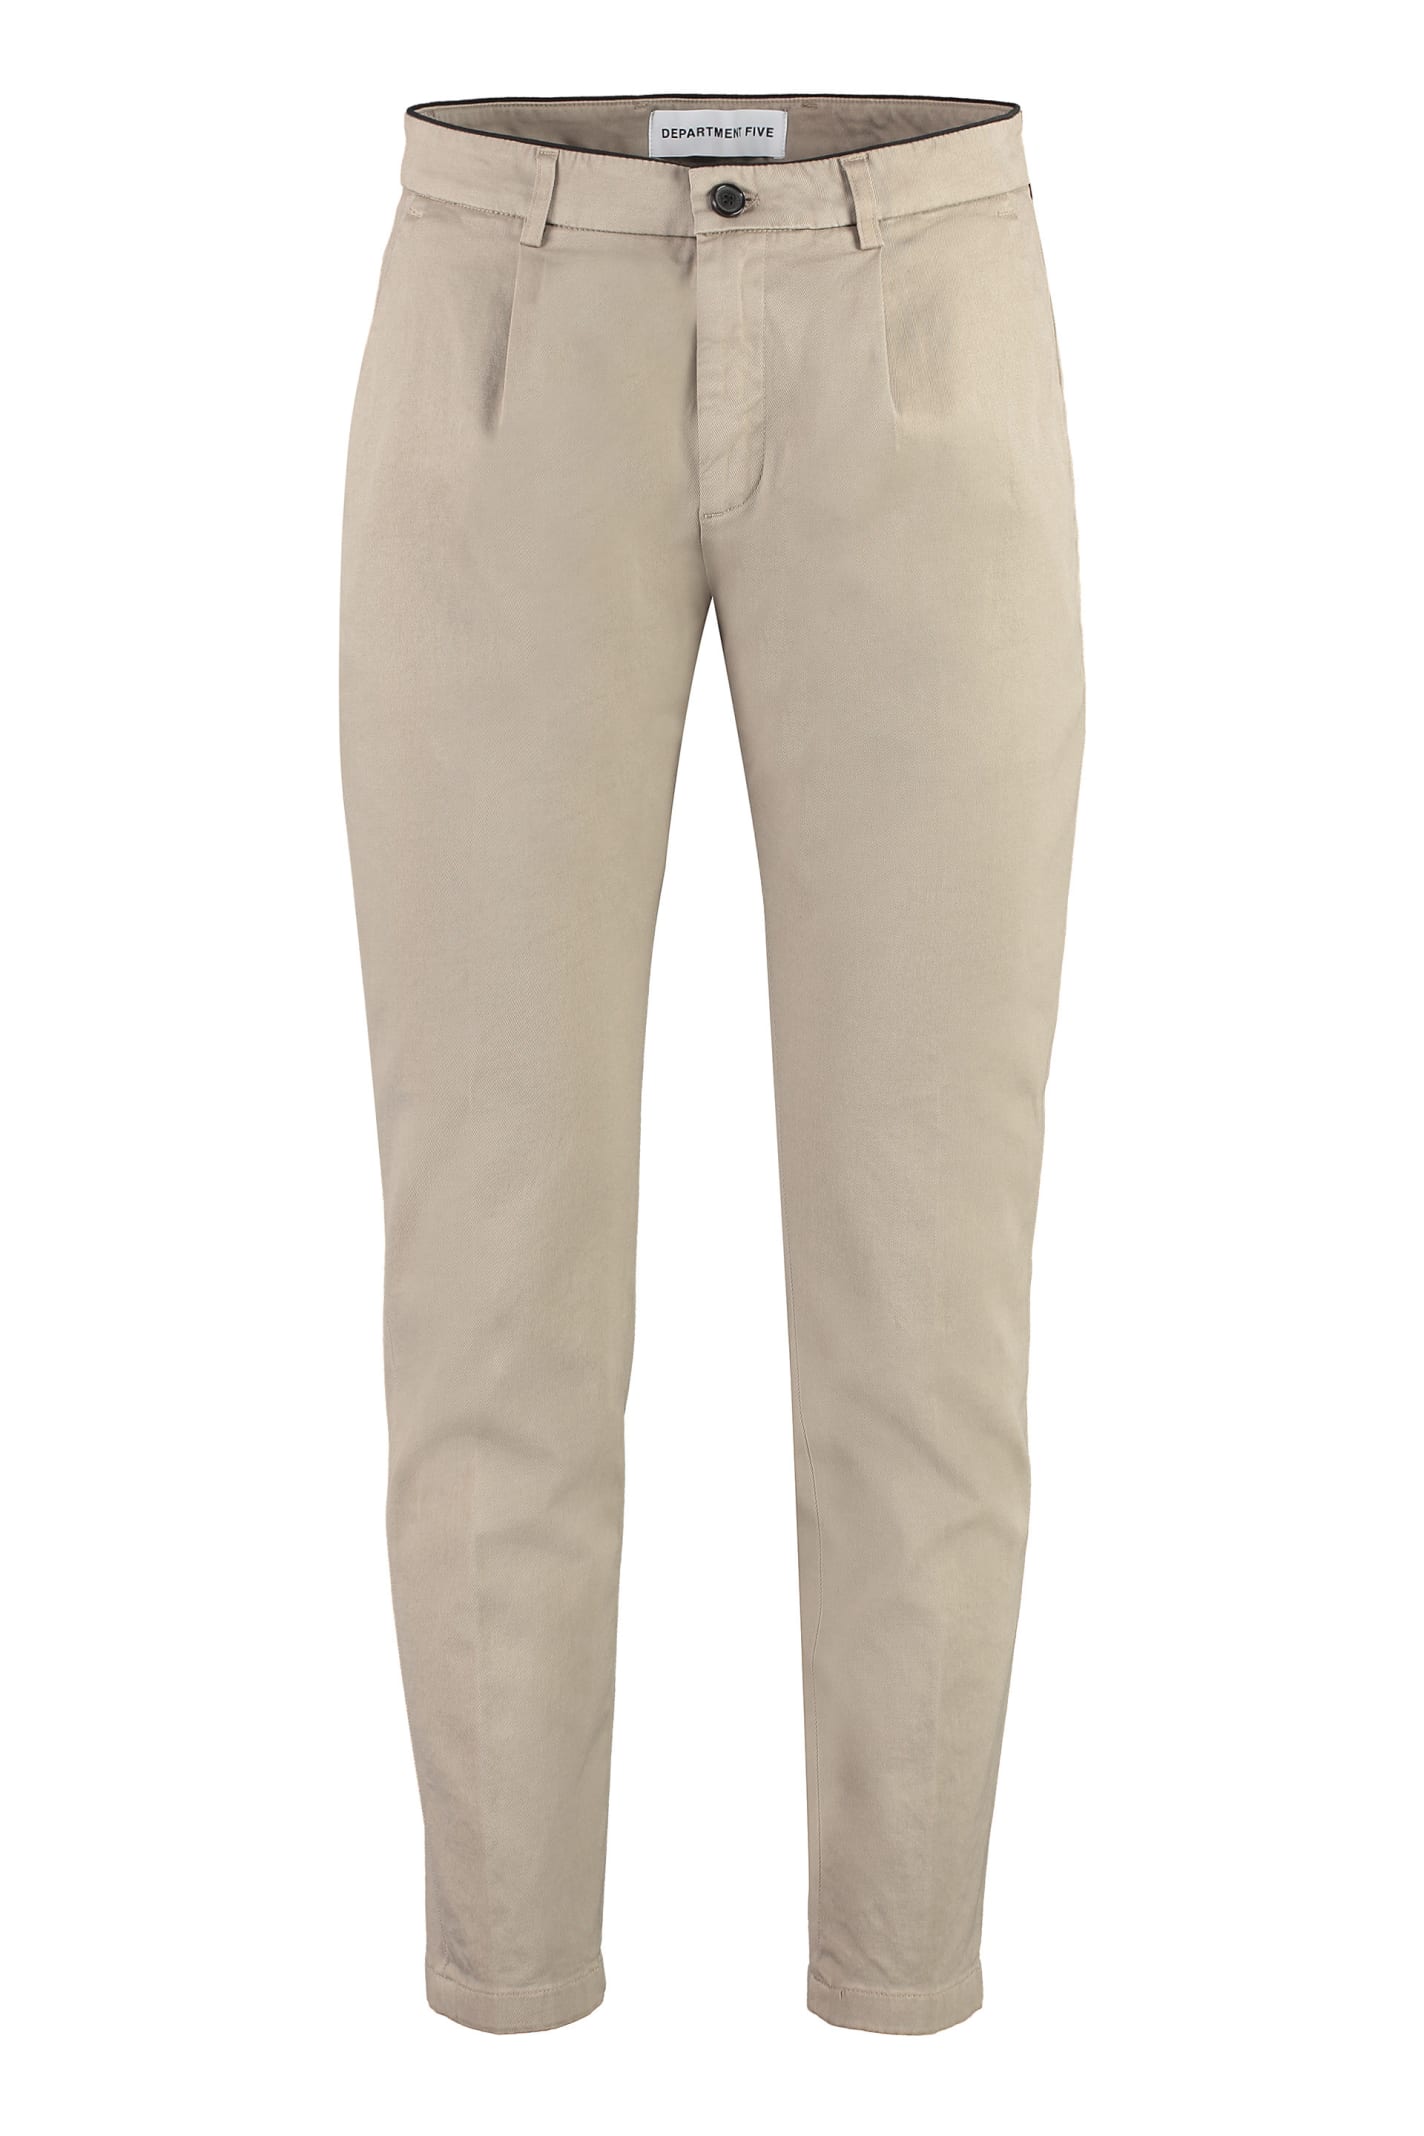 Shop Department Five Prince Chino Pants In Sand